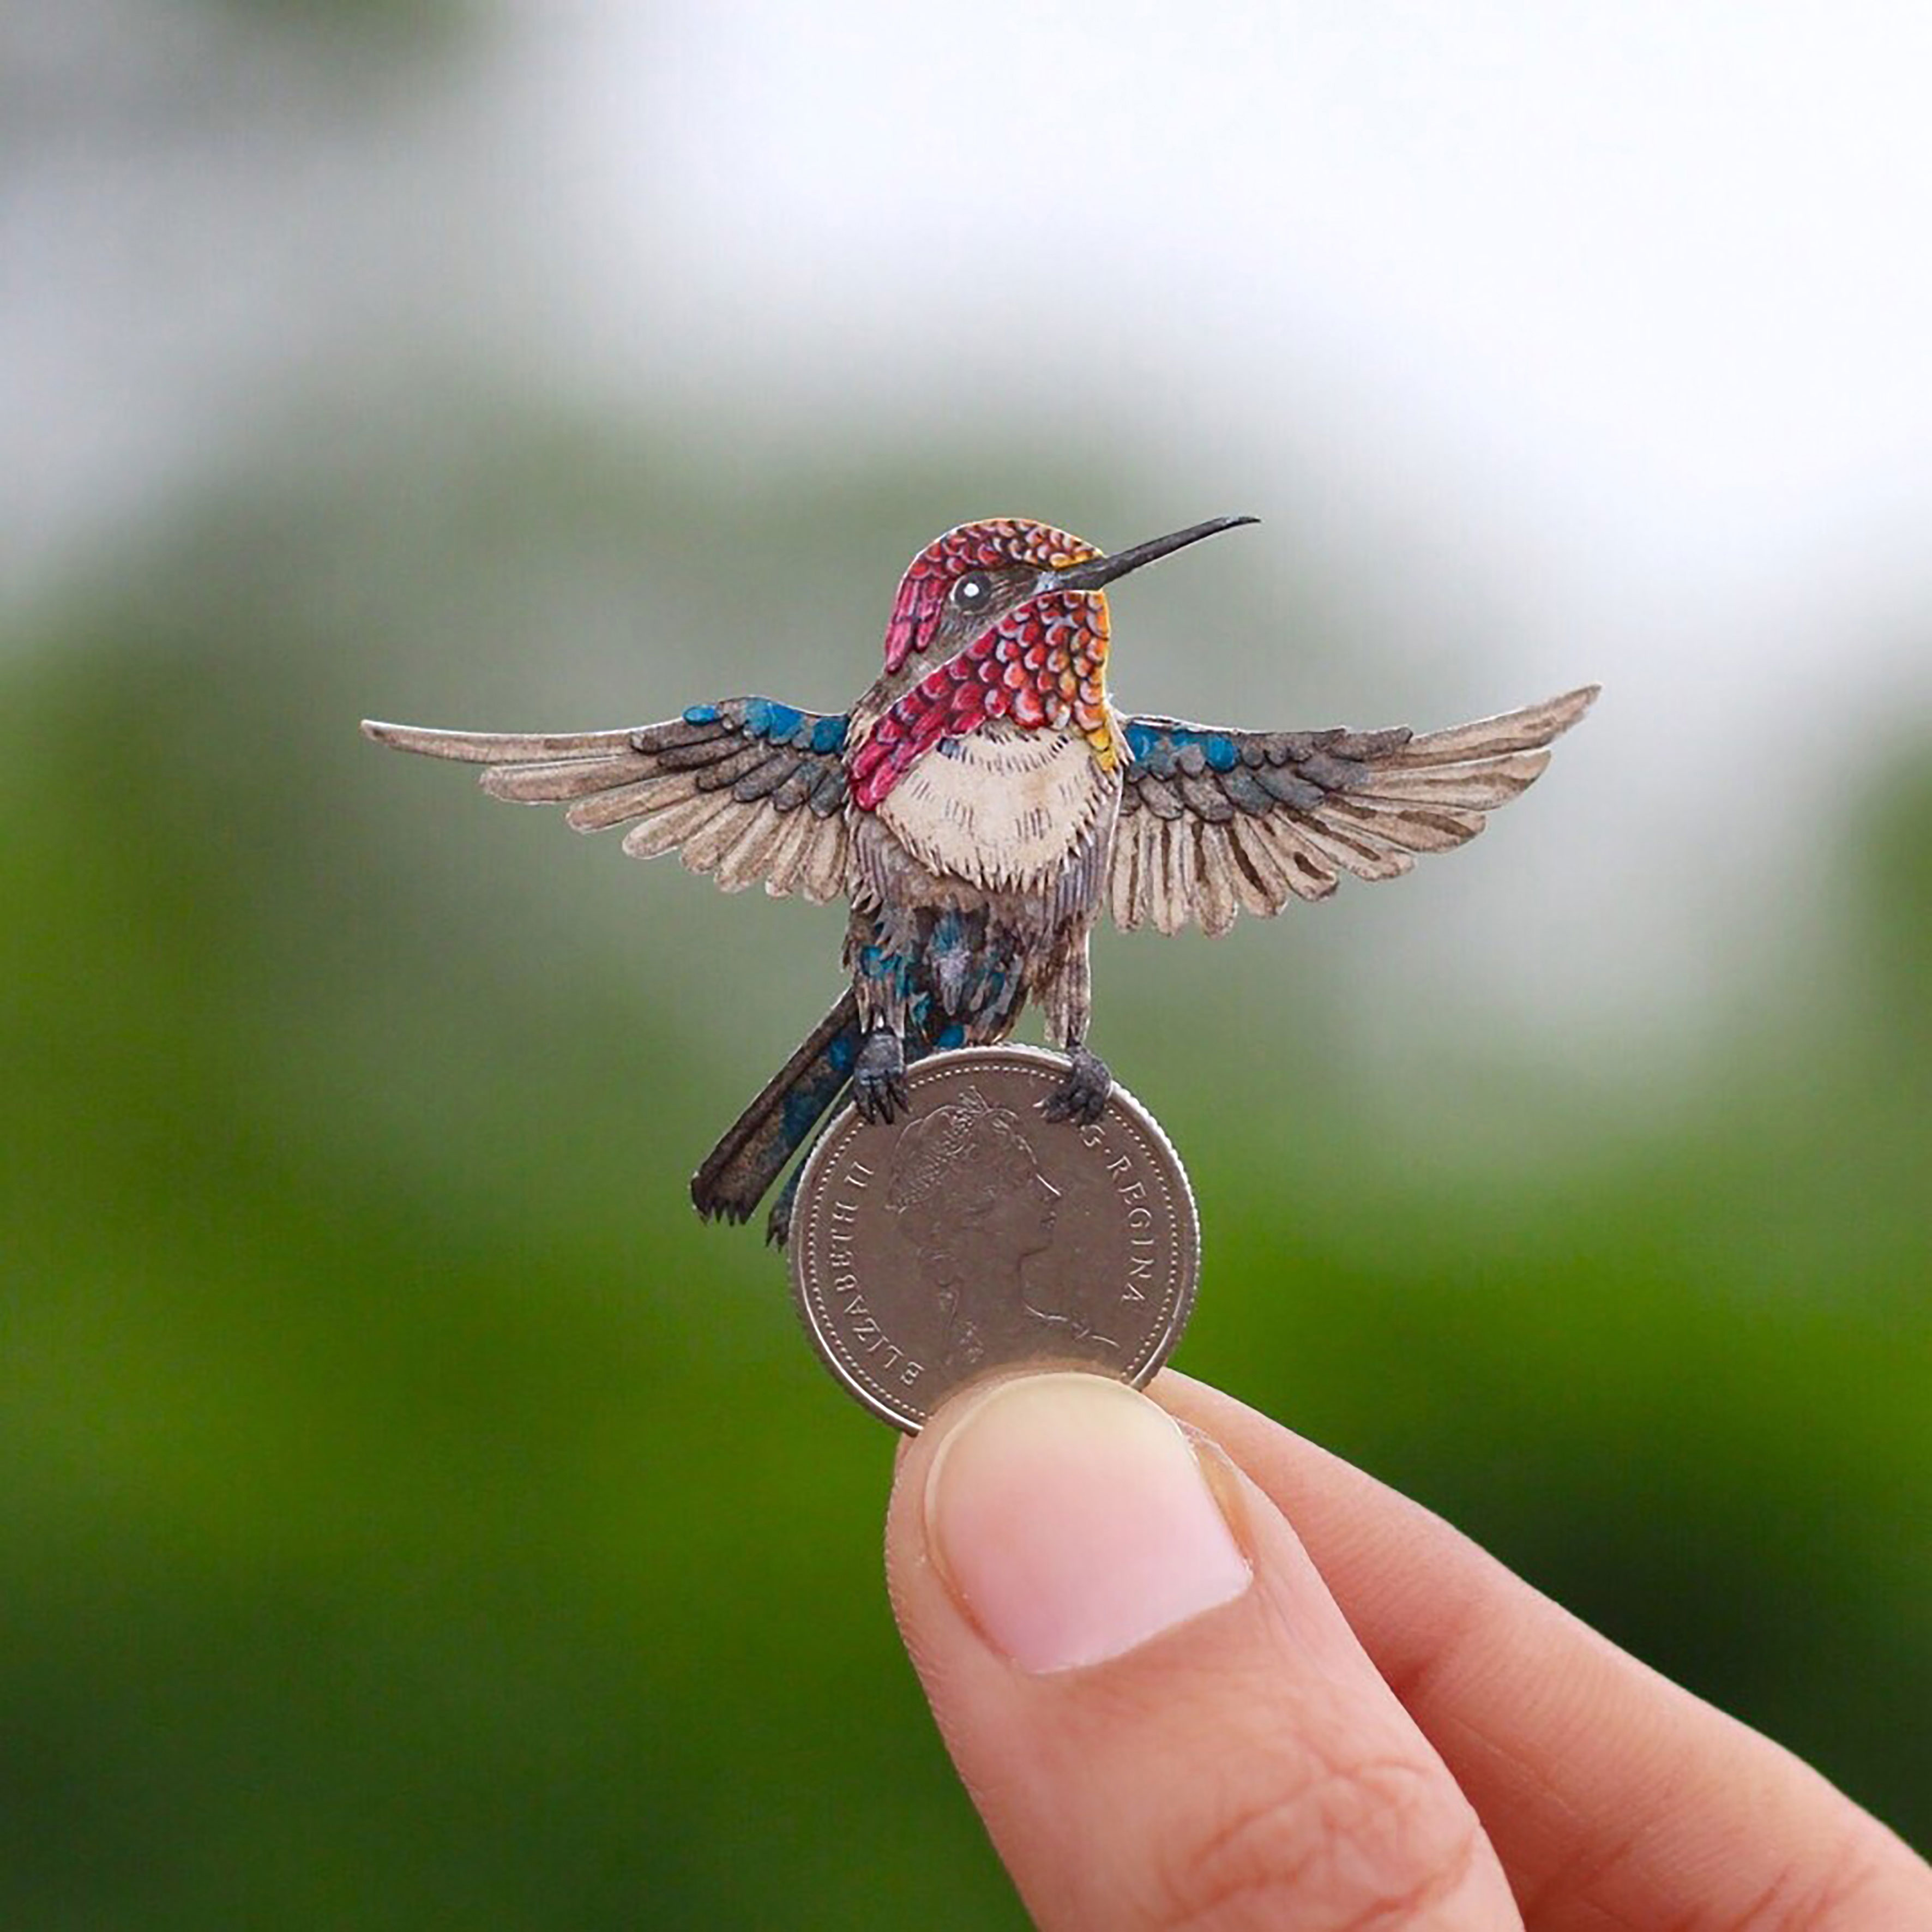 Dedicated couple makes tiny intricate paper birds